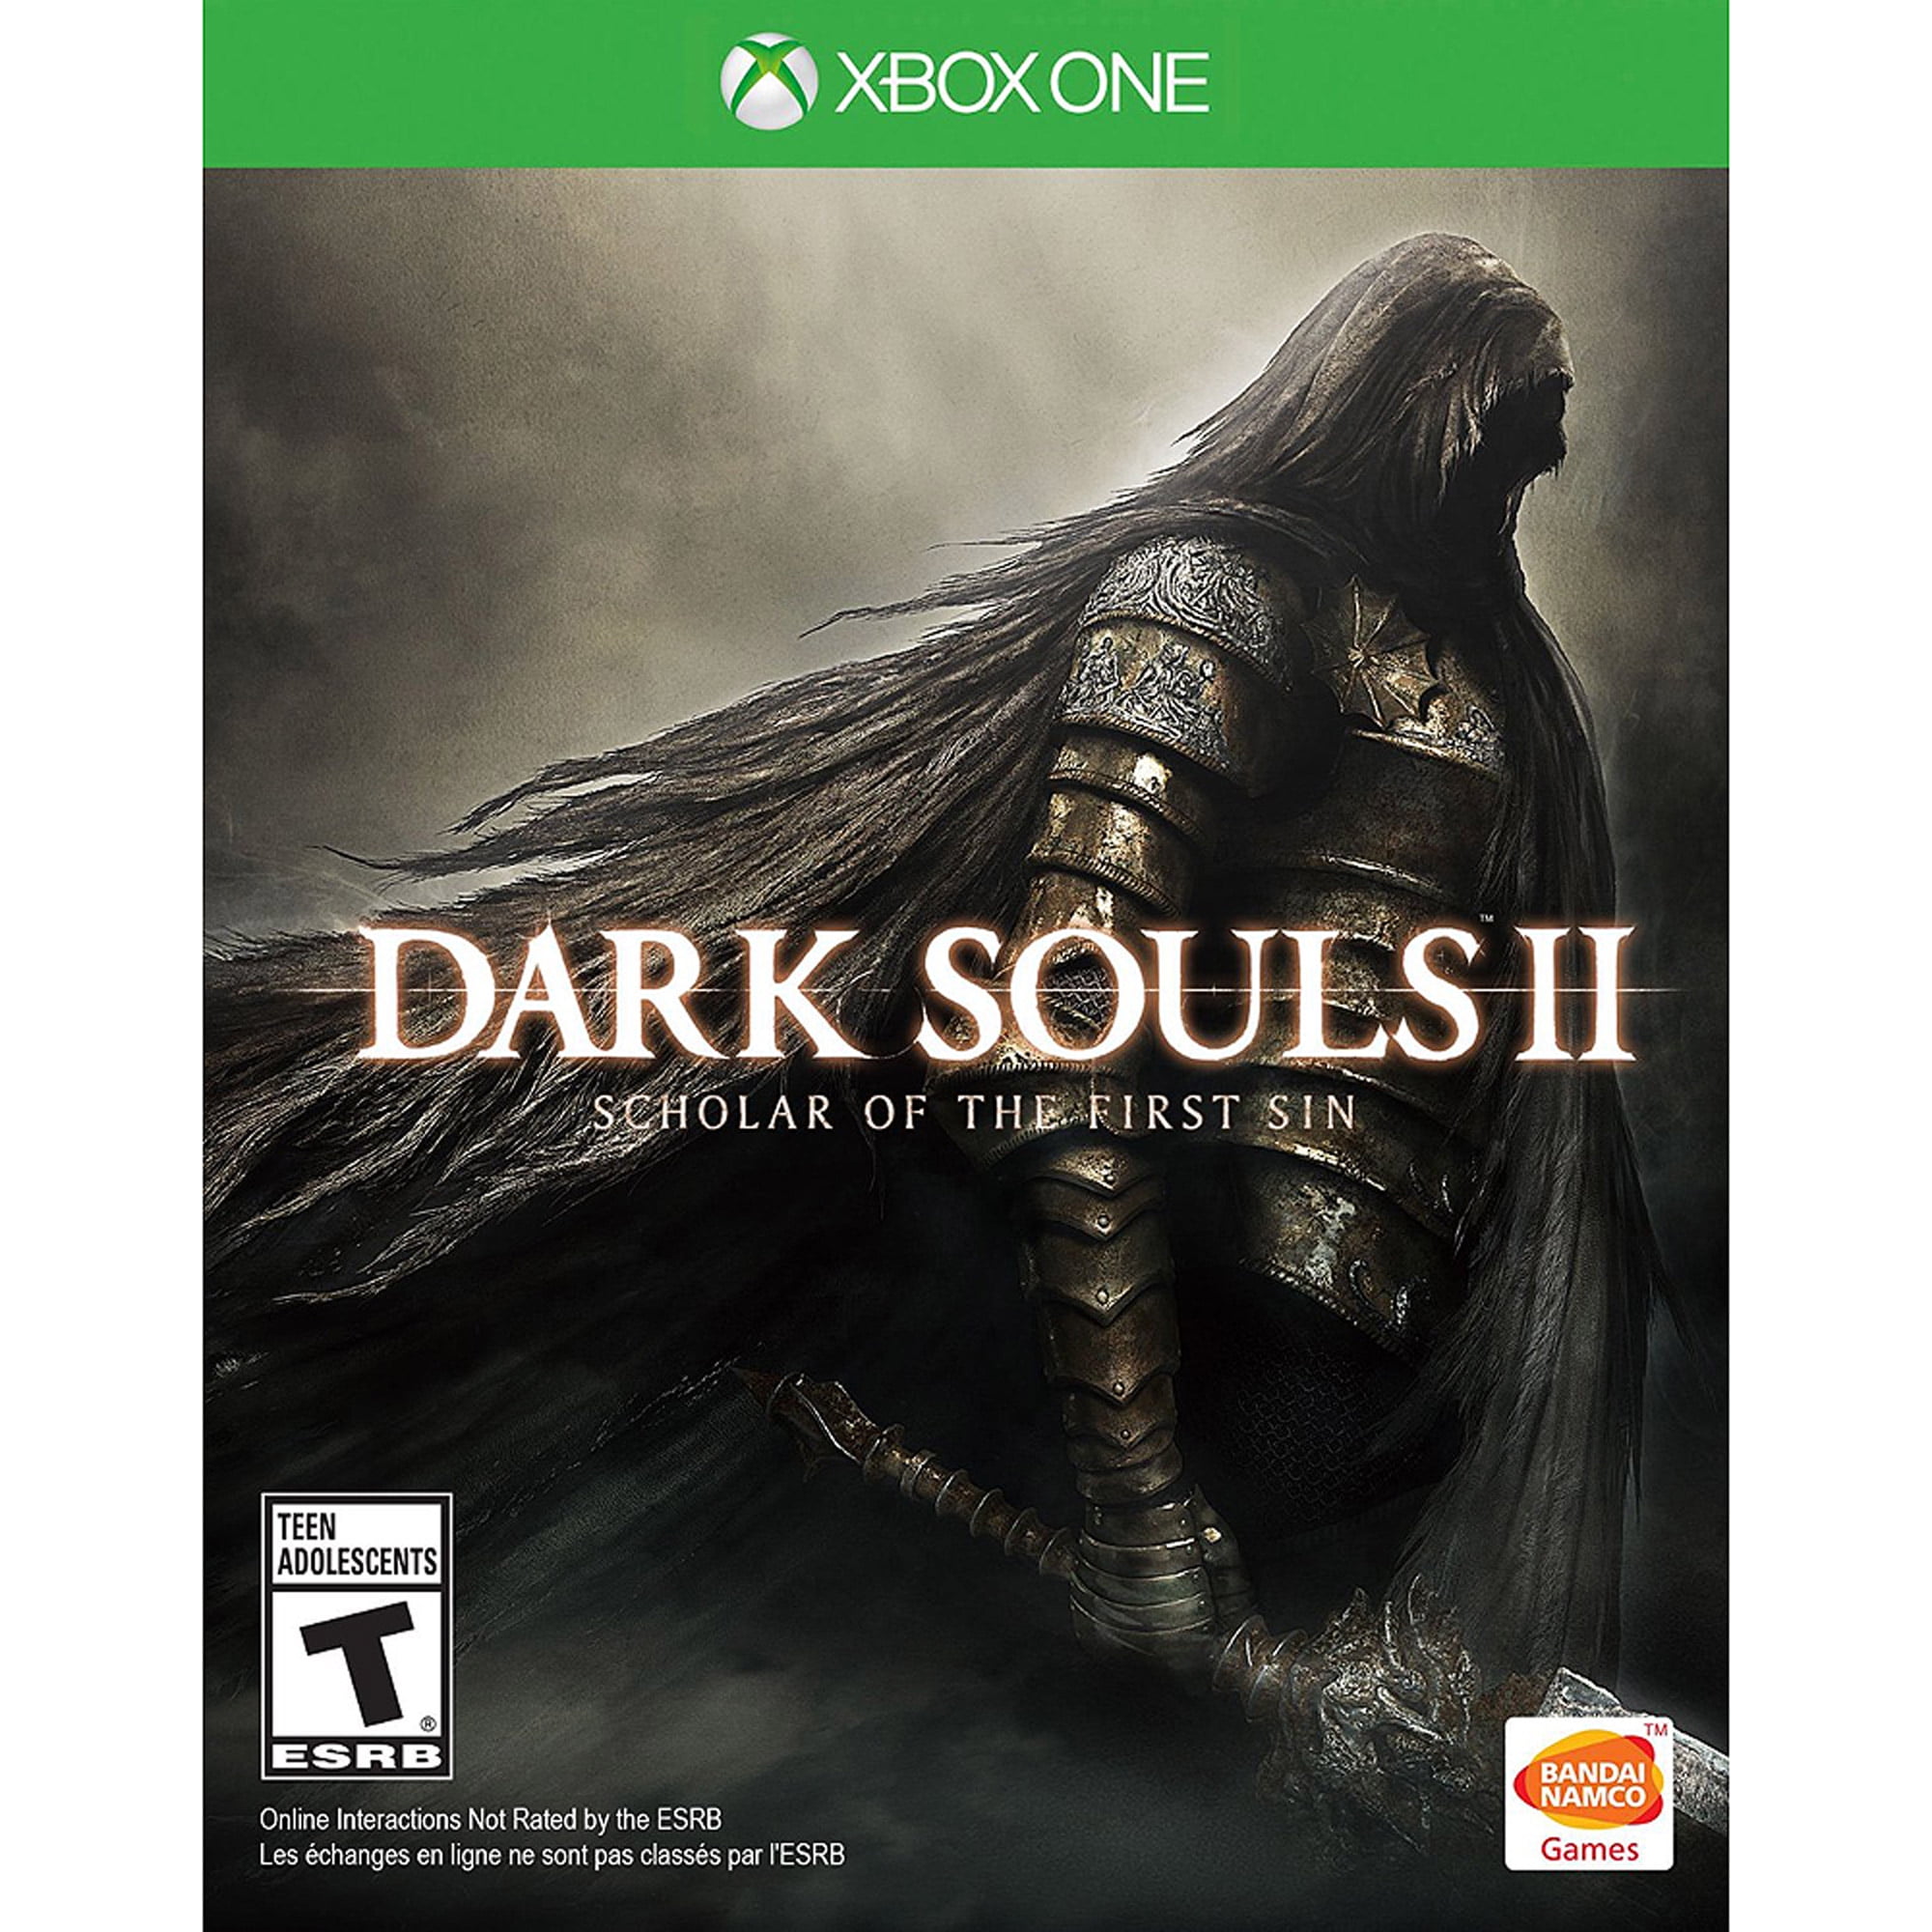 Dark Souls 2: Scholar of the First Sin and remixing video games - PlayLab!  Magazine